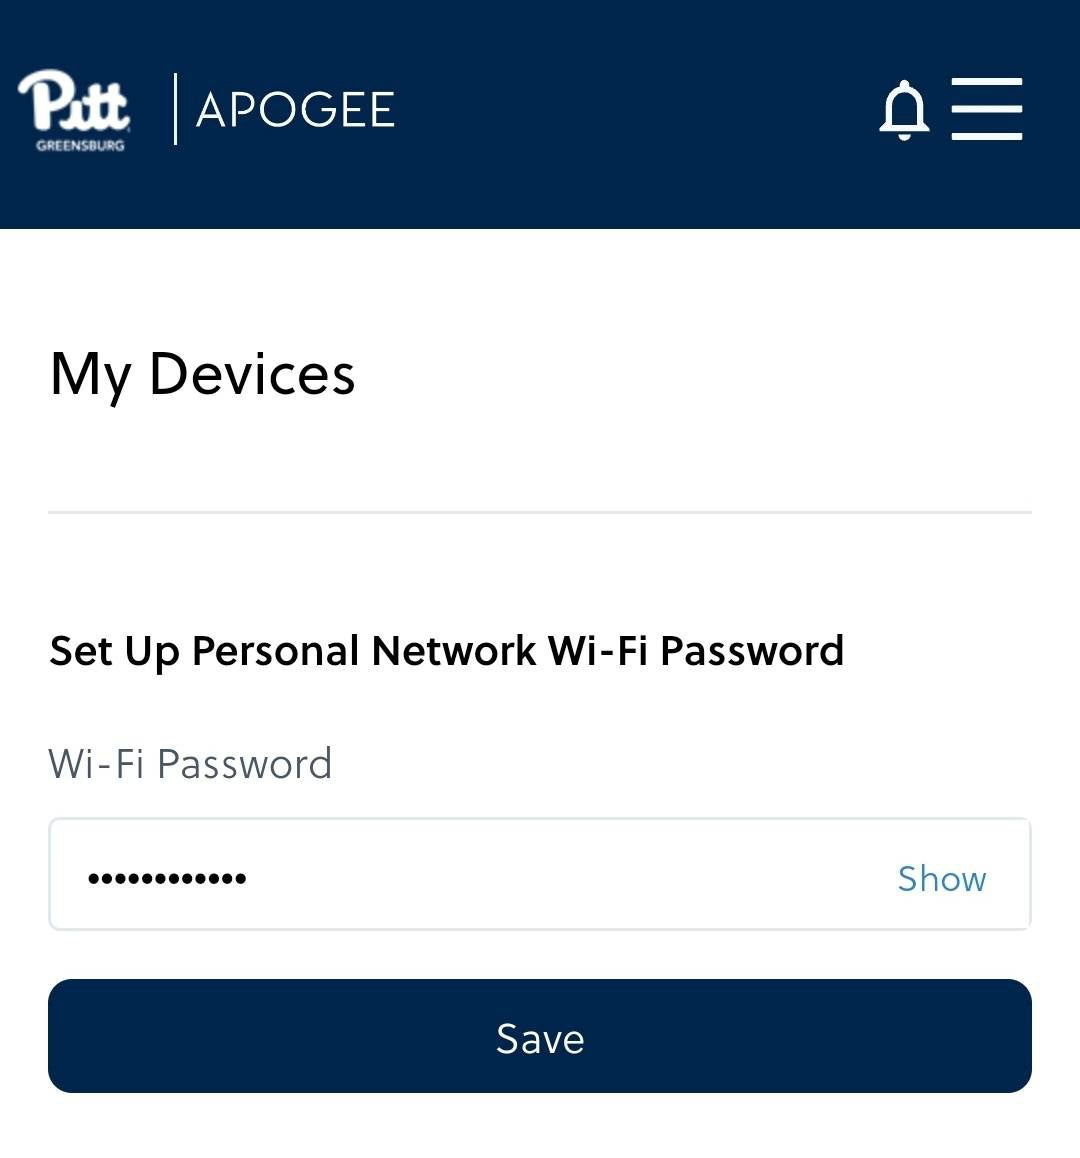 Screenshot of Apogee app reading "Set Up Personal Network Wi-Fi Password" with text field to do so. Save button.